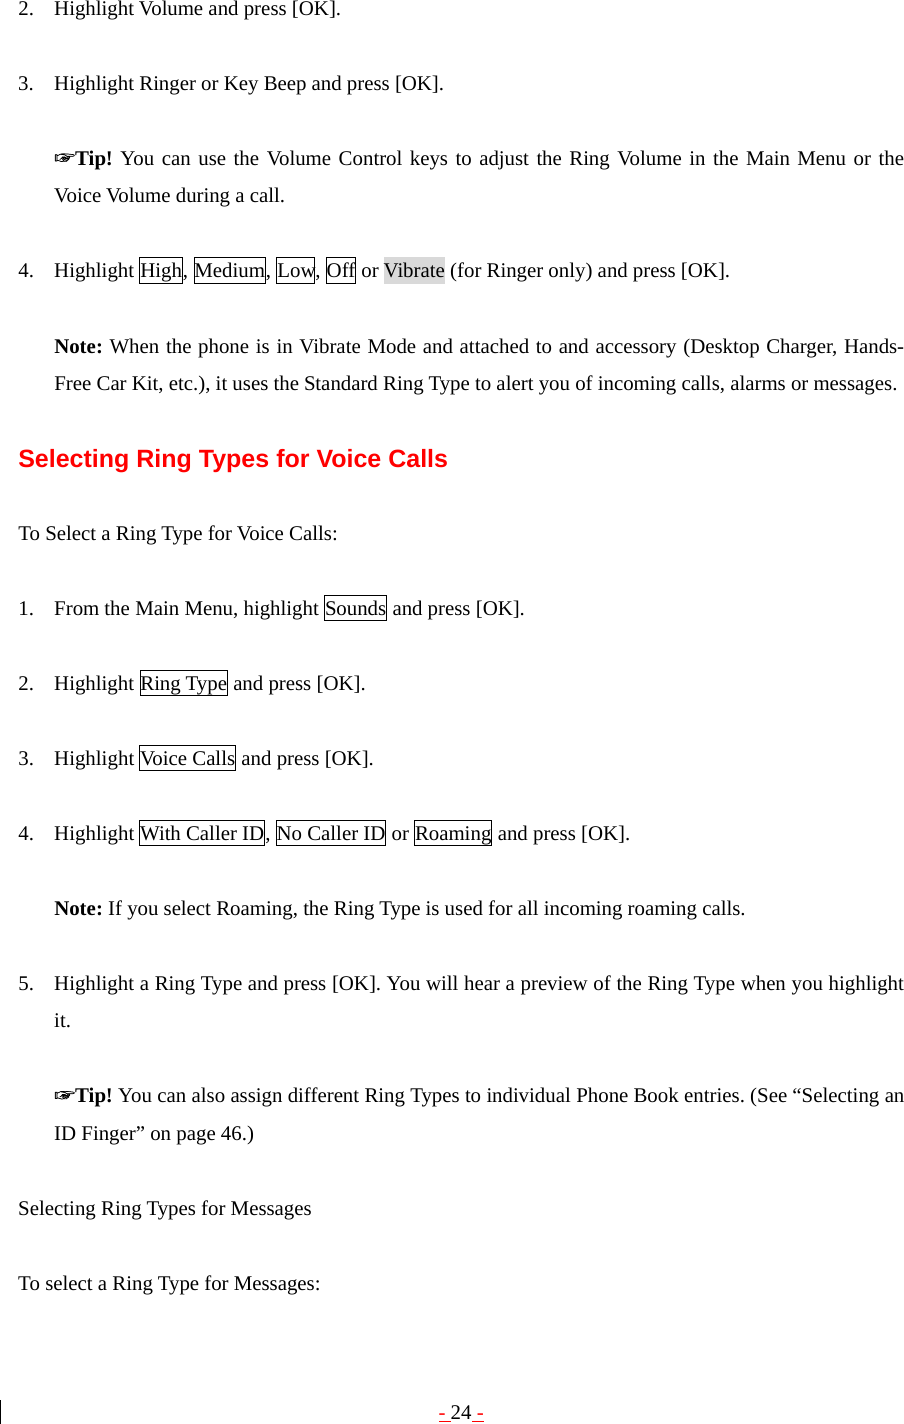 - 24 -  2. Highlight Volume and press [OK].  3. Highlight Ringer or Key Beep and press [OK].  ☞Tip! You can use the Volume Control keys to adjust the Ring Volume in the Main Menu or the Voice Volume during a call.  4. Highlight High, Medium, Low, Off or Vibrate (for Ringer only) and press [OK].  Note: When the phone is in Vibrate Mode and attached to and accessory (Desktop Charger, Hands-Free Car Kit, etc.), it uses the Standard Ring Type to alert you of incoming calls, alarms or messages.  Selecting Ring Types for Voice Calls  To Select a Ring Type for Voice Calls:  1. From the Main Menu, highlight Sounds and press [OK].  2. Highlight Ring Type and press [OK].  3. Highlight Voice Calls and press [OK].  4. Highlight With Caller ID, No Caller ID or Roaming and press [OK].  Note: If you select Roaming, the Ring Type is used for all incoming roaming calls.  5. Highlight a Ring Type and press [OK]. You will hear a preview of the Ring Type when you highlight it.  ☞Tip! You can also assign different Ring Types to individual Phone Book entries. (See “Selecting an ID Finger” on page 46.)  Selecting Ring Types for Messages  To select a Ring Type for Messages: 